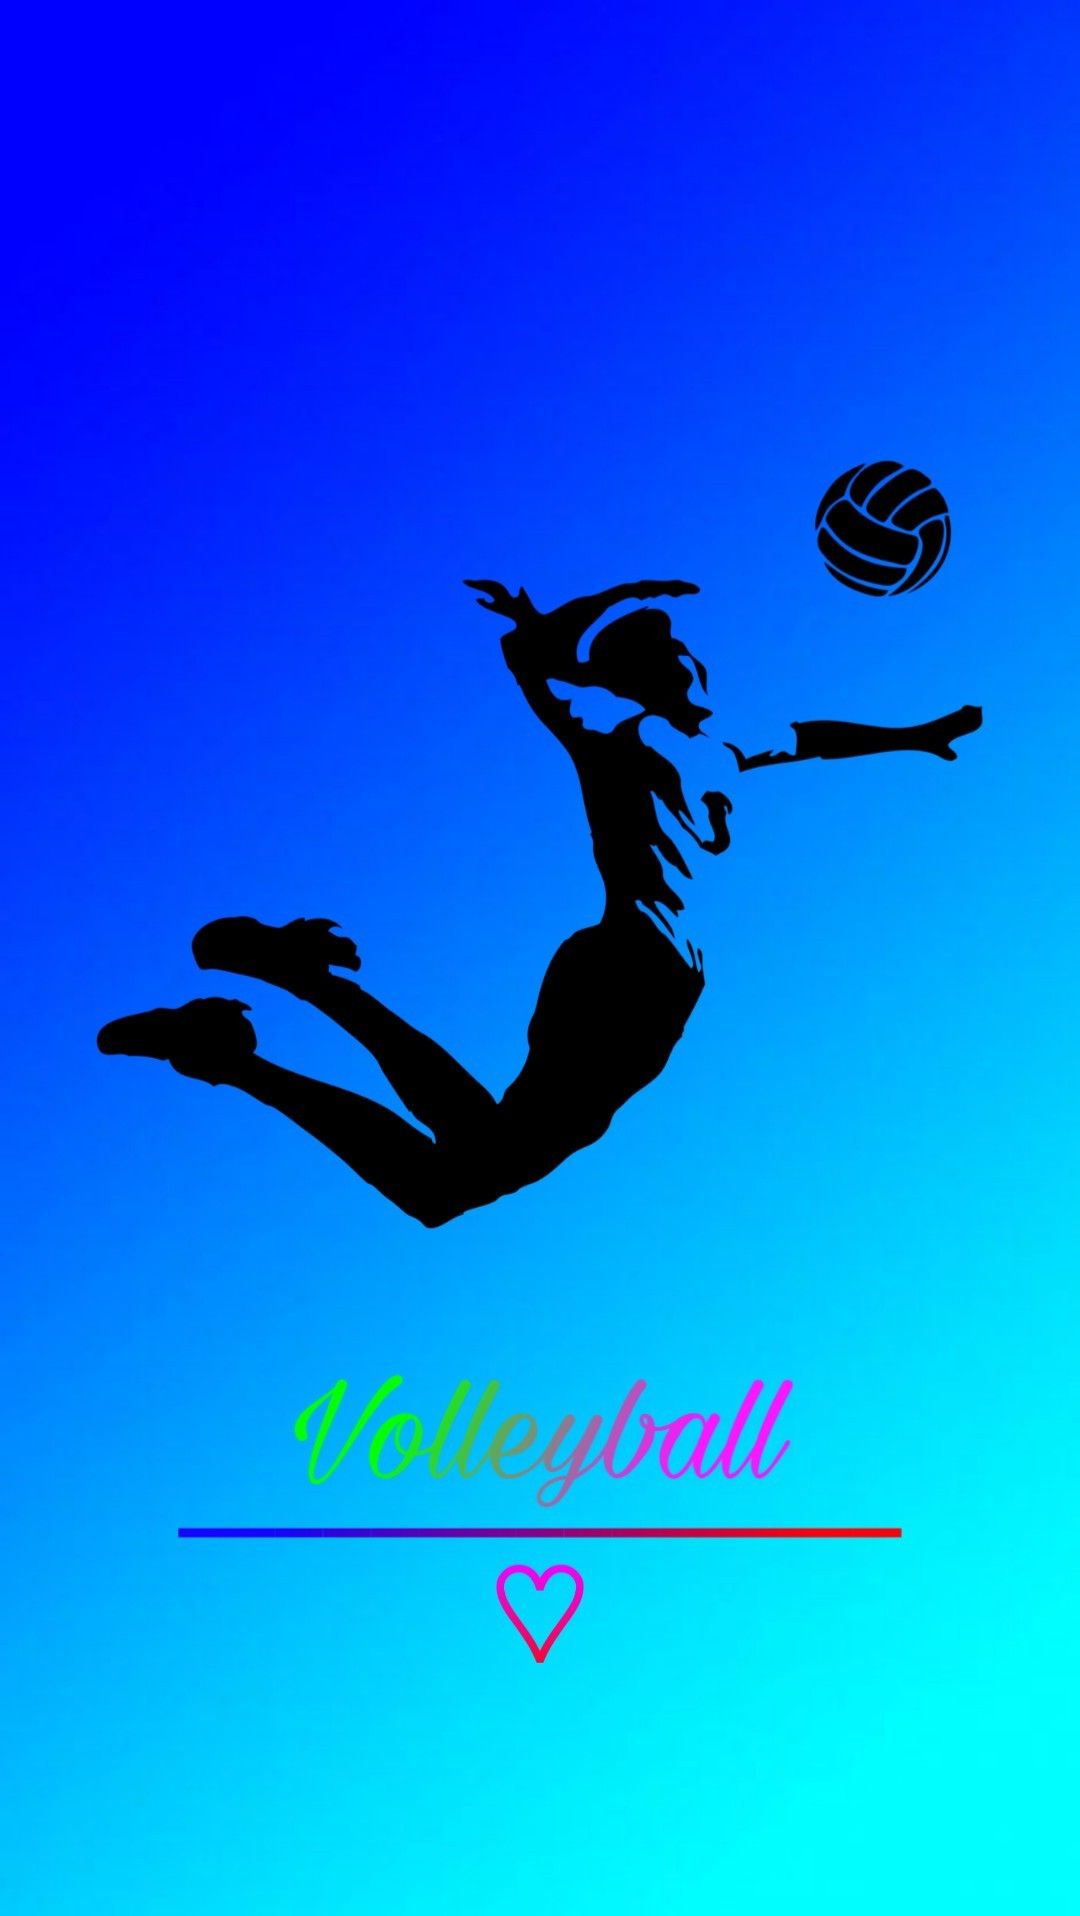 Volleyball Wallpaper. Volleyball wallpaper, Volleyball image, Volleyball